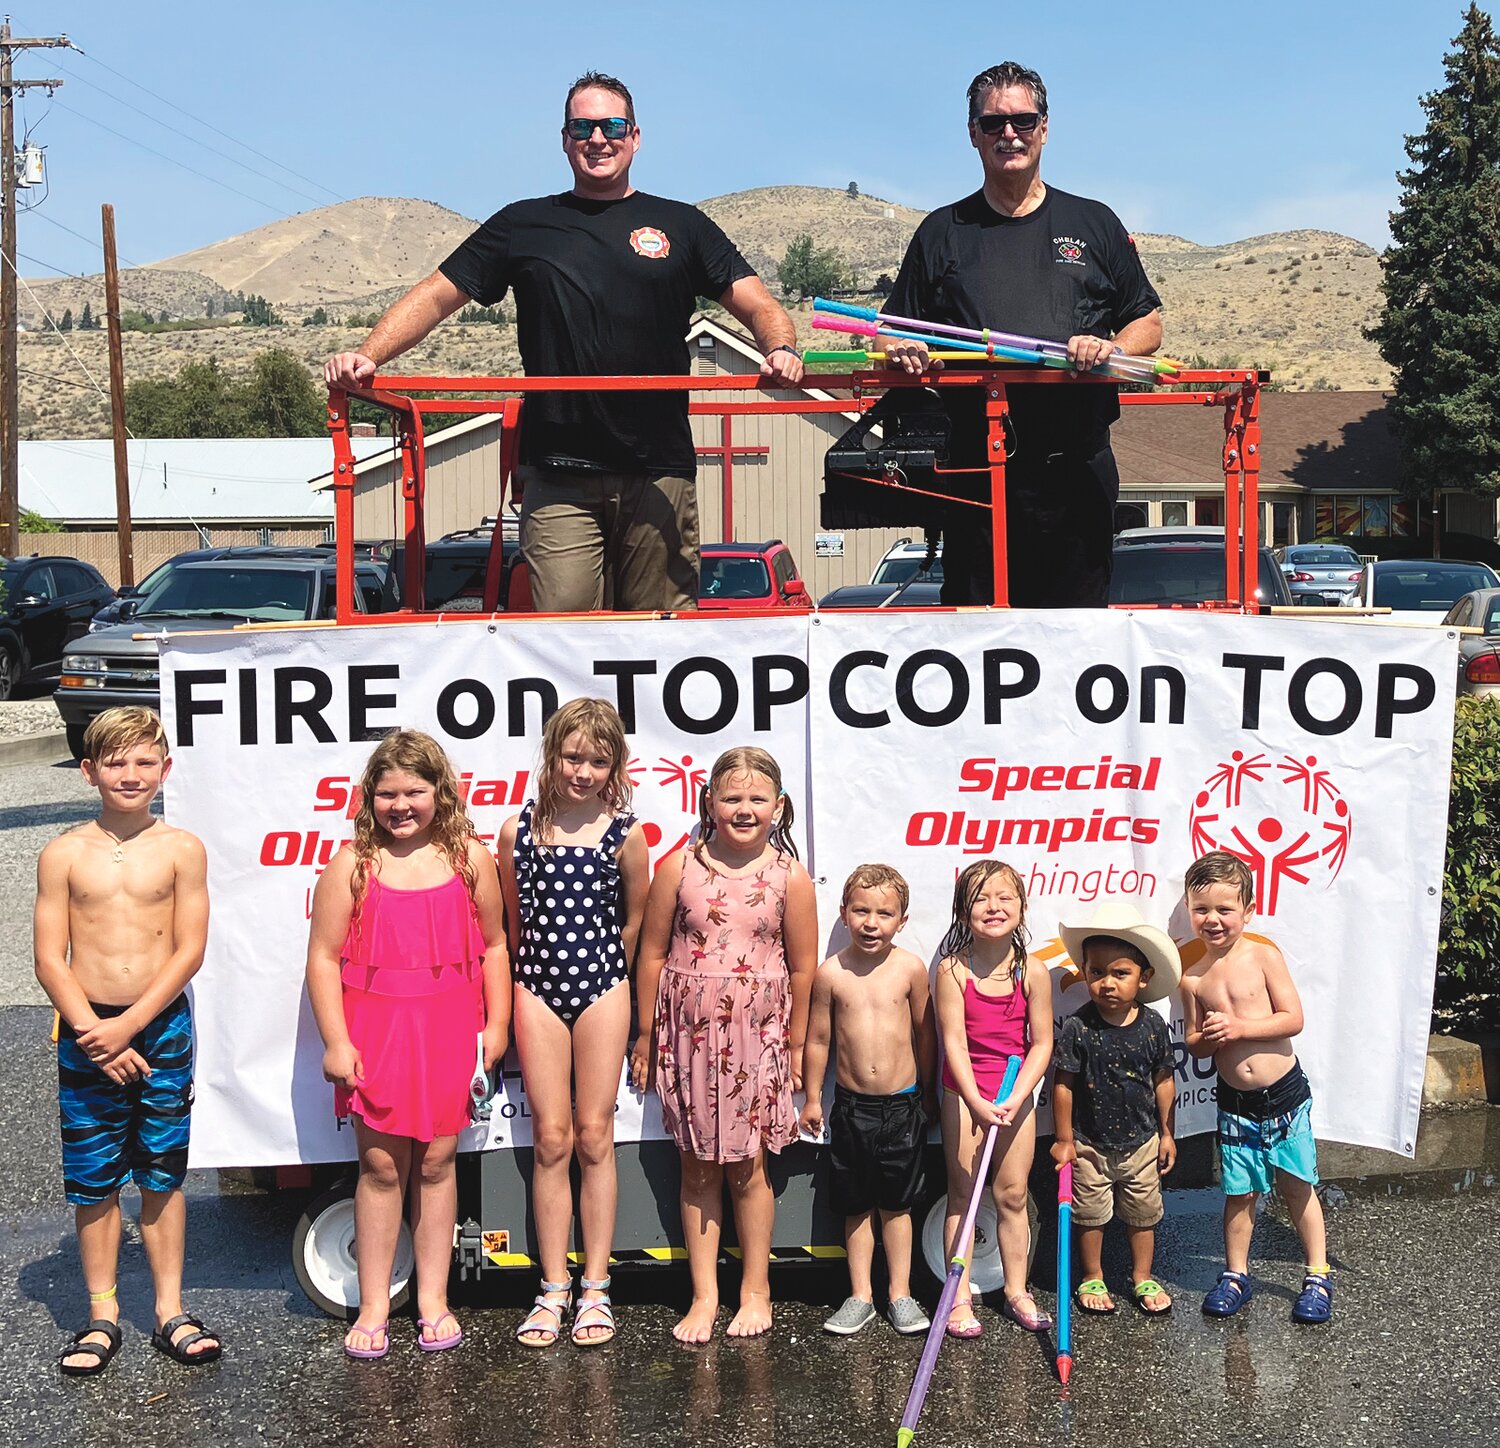 Five hundred gallons of water were used during the Fire & Cop on Top event on August 4, with around 100 participants taking aim at Chelan Fire & Rescue and Chelan County Sheriff personnel. Pictured with some of the children are Troy Keene, (left), and Dennis Hill (right of Chelan Fire & Rescue.
Courtesy Regional Manager Tim Toons